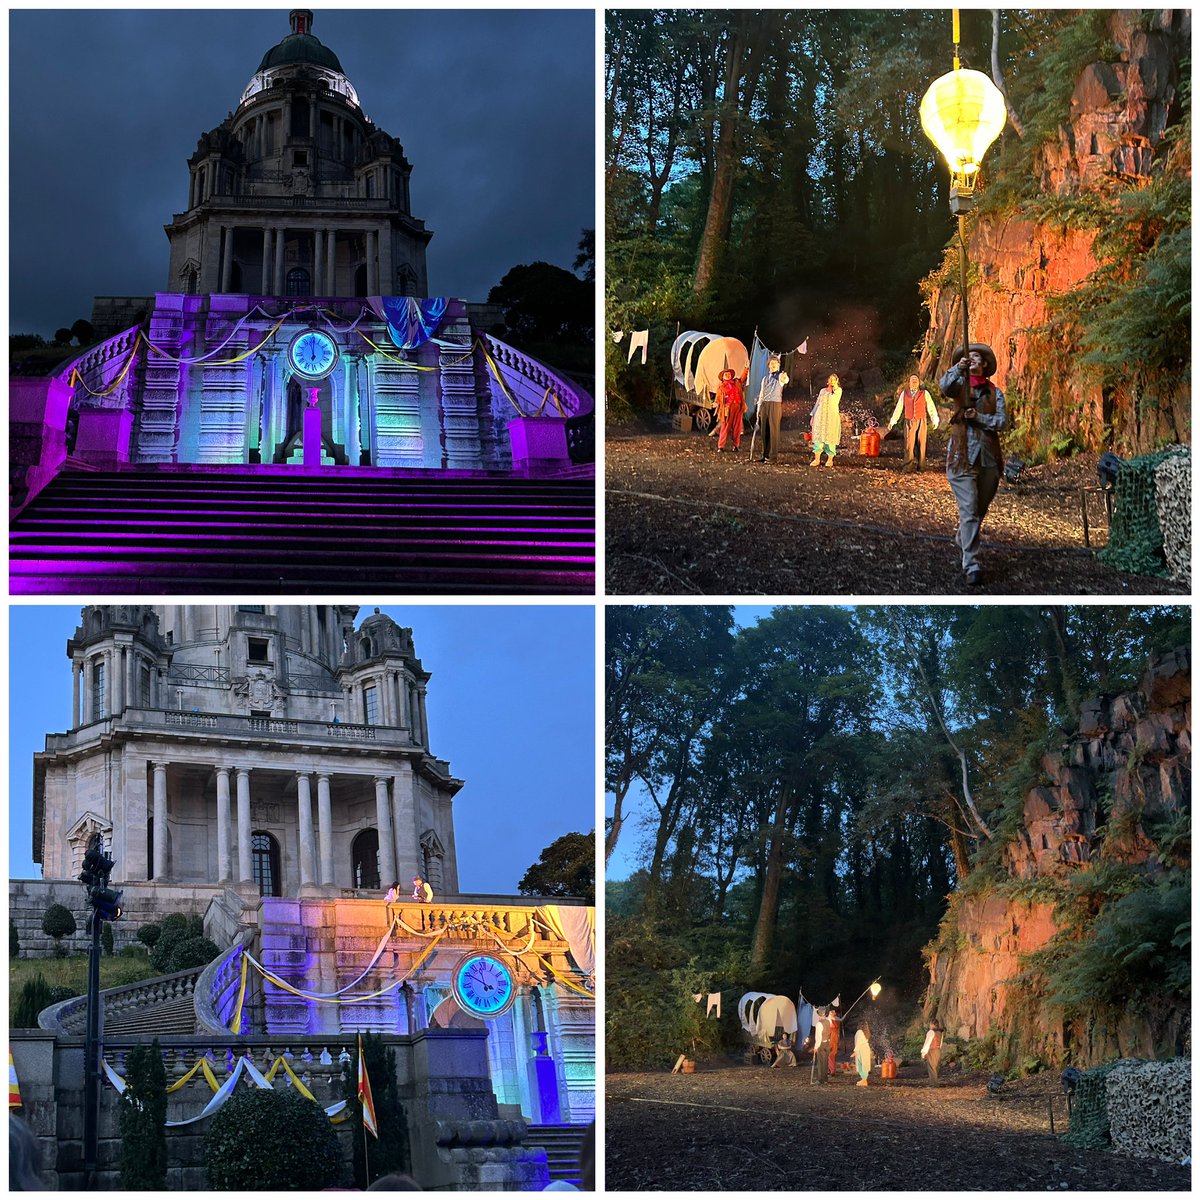 Lovely day in Lancaster @WilliamsonPark followed by a wonderful outdoor theatre performance of Around the World in 80 days @TheDukesTheatre #SummerHolidays #outdoortheatre